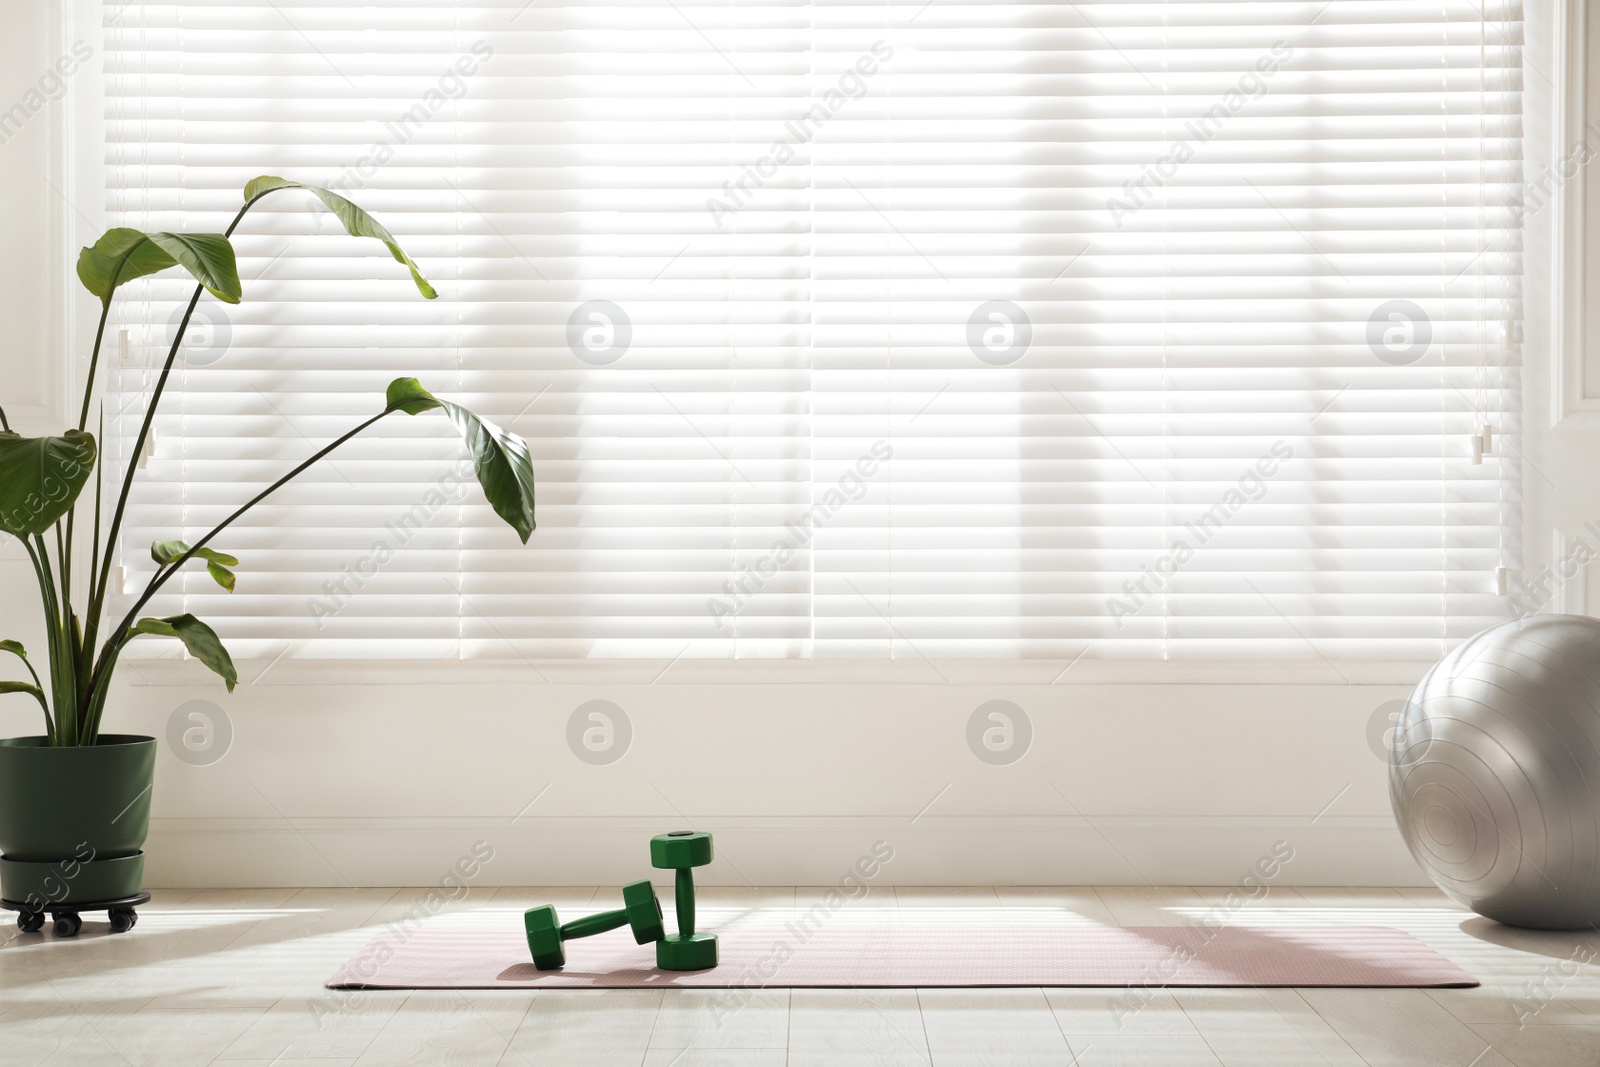 Photo of Exercise mat, dumbbells, fitness ball and houseplant near window in spacious room